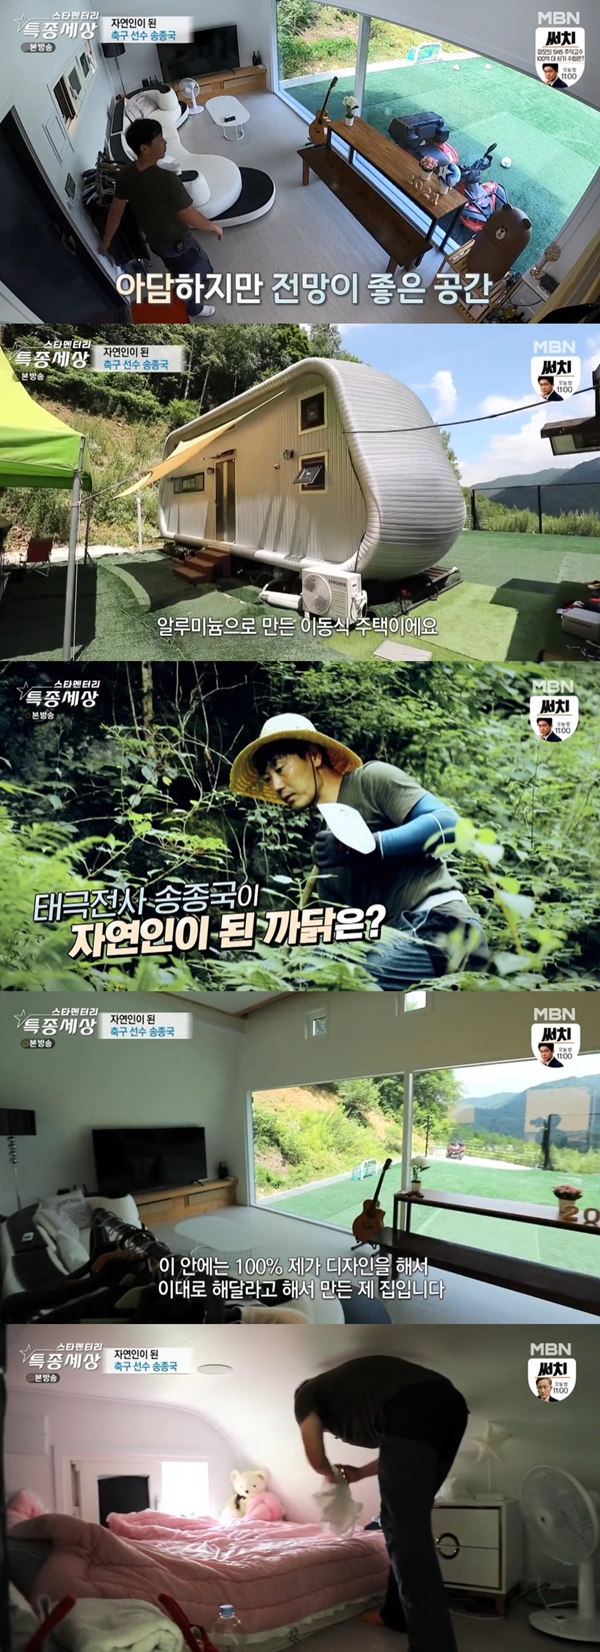 A Nest of Gentlefolk, set up by former footballer Song Chong-gug at the foot of the mountain, has been unveiled.MBN Starmentary Special World, which was broadcast on the 29th, was decorated with the nature Song Chong-gug.Song Chong-gug remarried 2006-year-old actor Park Yeon-su, but received a 2015 agreement in nine years.Song Chong-gug, who settled in the mountain after the divorce, was living a natural life in a warehouse house, digging herbs in a deep mountain mobile house. Its been seven years.It was about 10 pyeong space, but it was cozy and space-used. Song Chong-gug said, This house was built and moved here: an aluminum mobile house.I asked him to design the inside of the bus outside. On the second floor, I made a bedroom space that I could sleep alone. Song Chong-gug said, If you look outside, this window is like a frame.Personally, it is a space I love so much. 